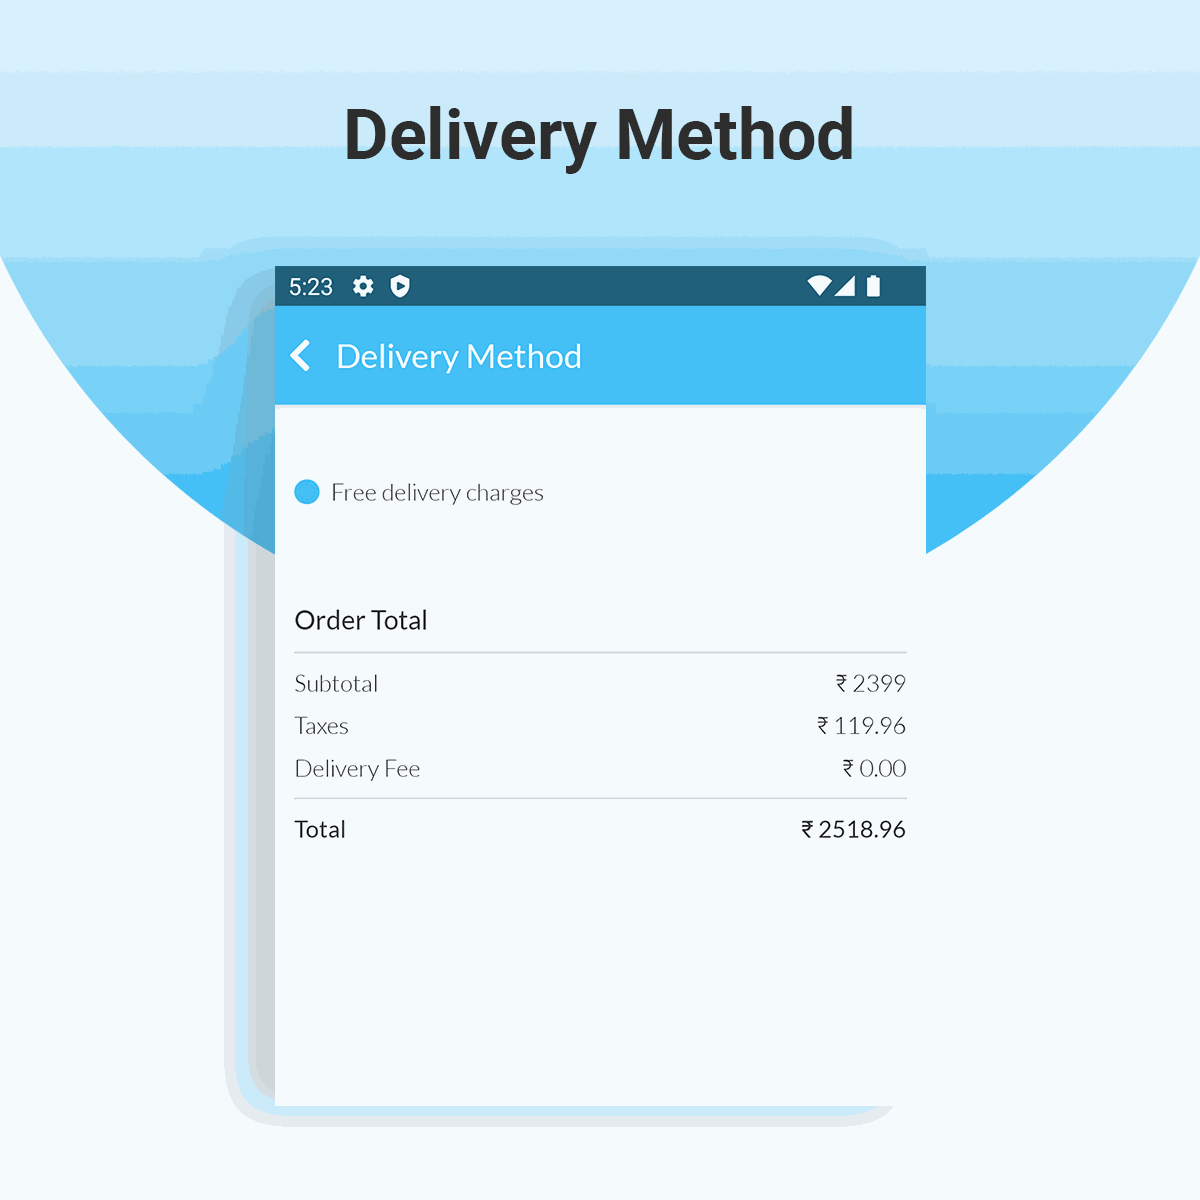 Delivery Method